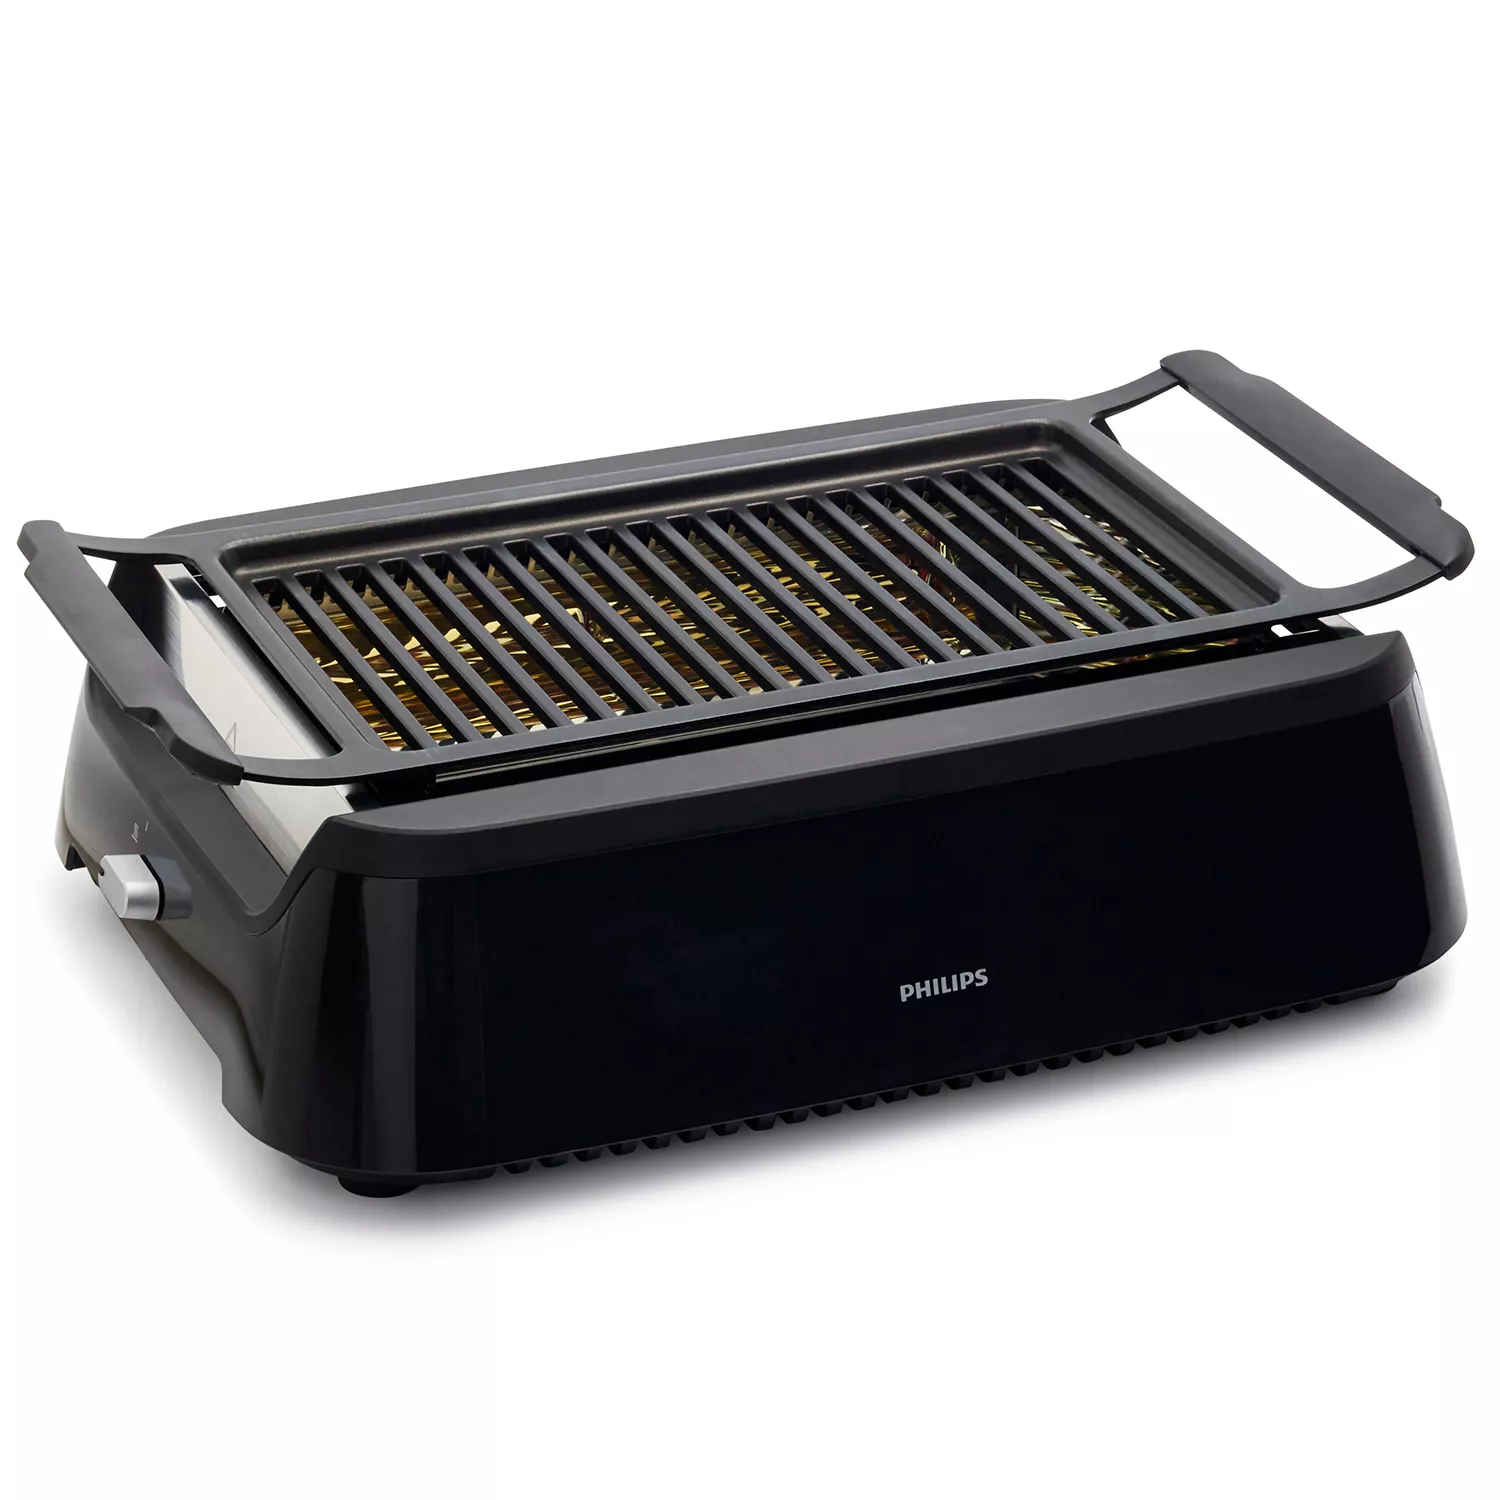 Philips smokeless indoor grill: Get half-off this top-rated device